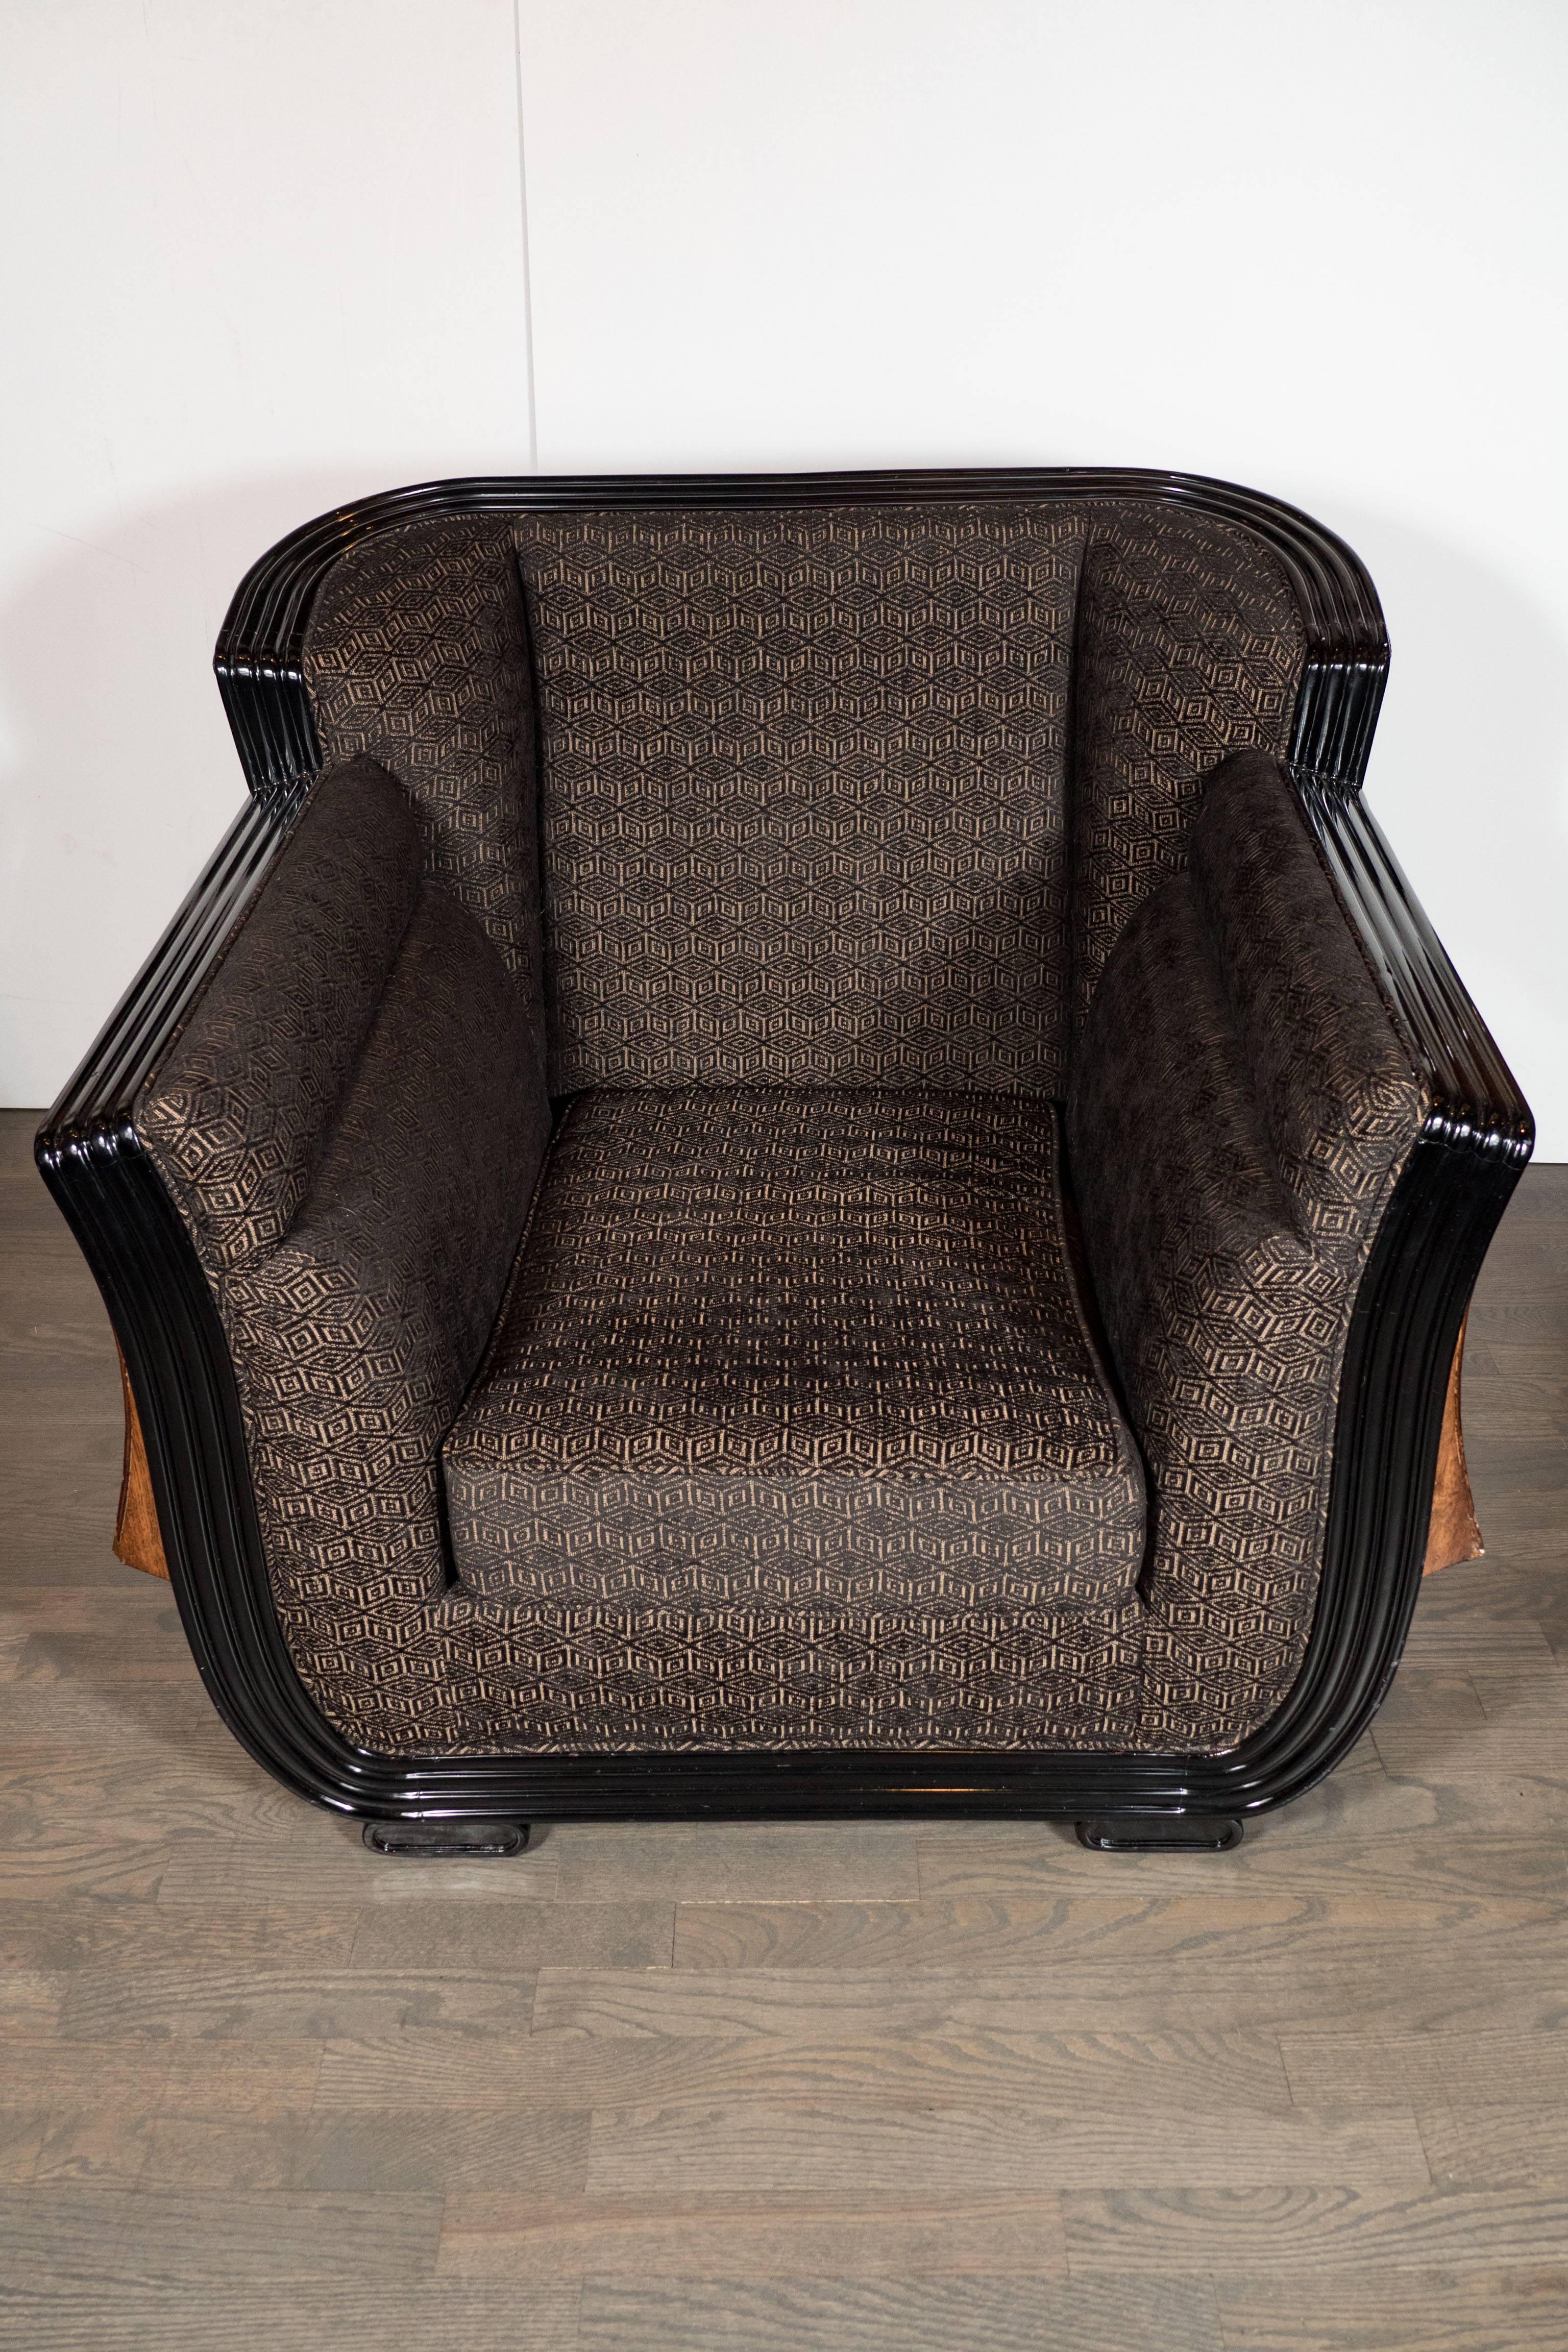 An Art Deco club chair with inlay designs- in exotic elm, burled walnut, mahogany and black lacquer- flanking the sides of the chair. The interior upholstery of the chair is contoured for maximum comfort, it is newly upholstered in a geometric